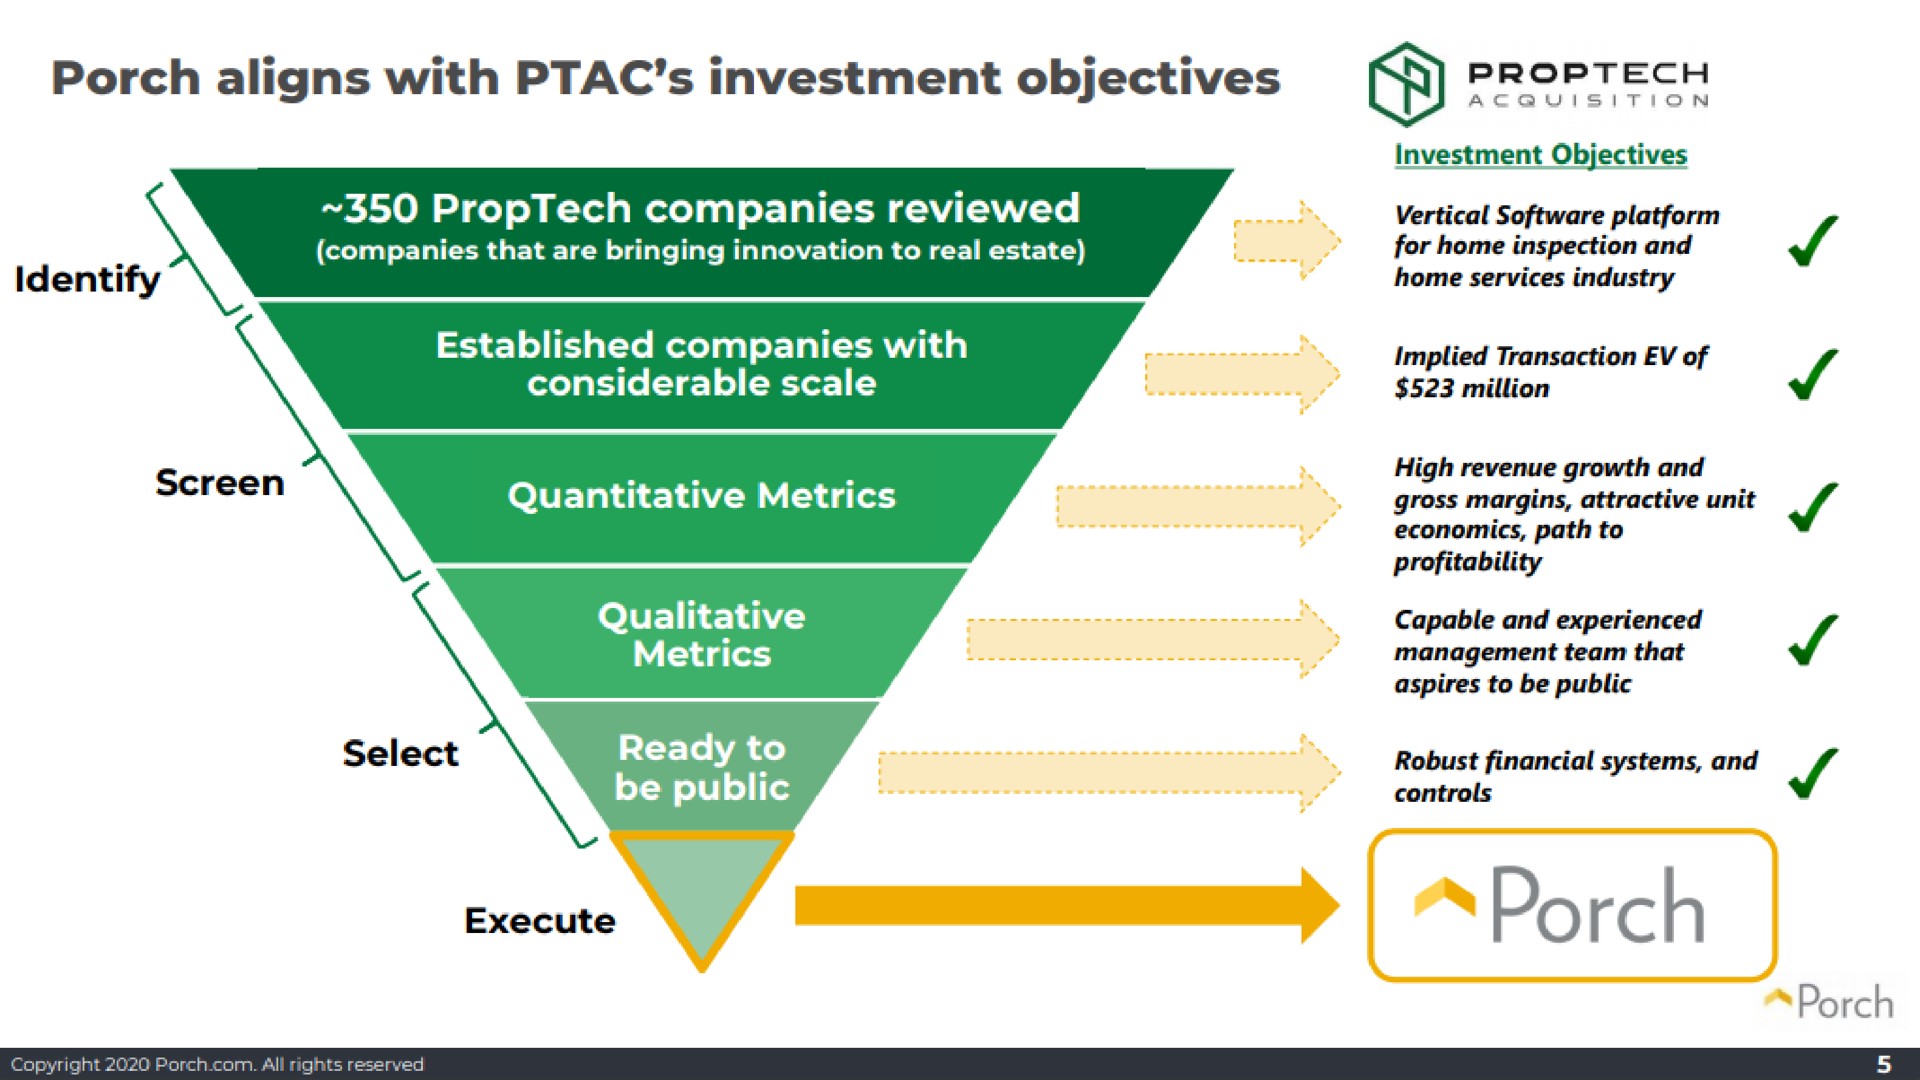 porch aligns with investment objectives porch | Porch